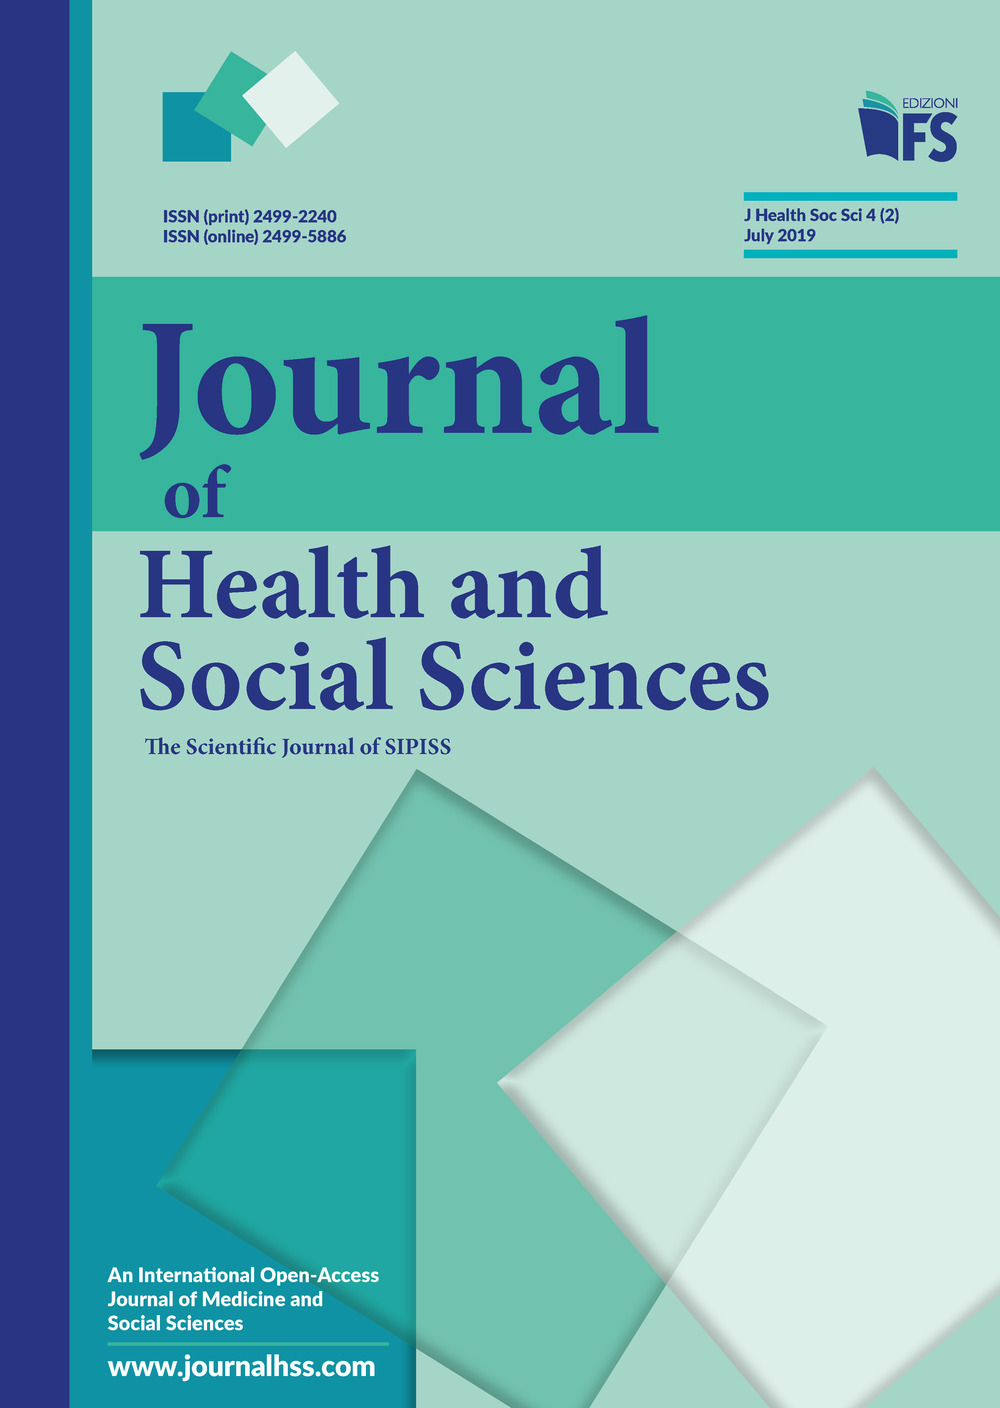 Journal of health and social sciences (2019). Vol. 2: July